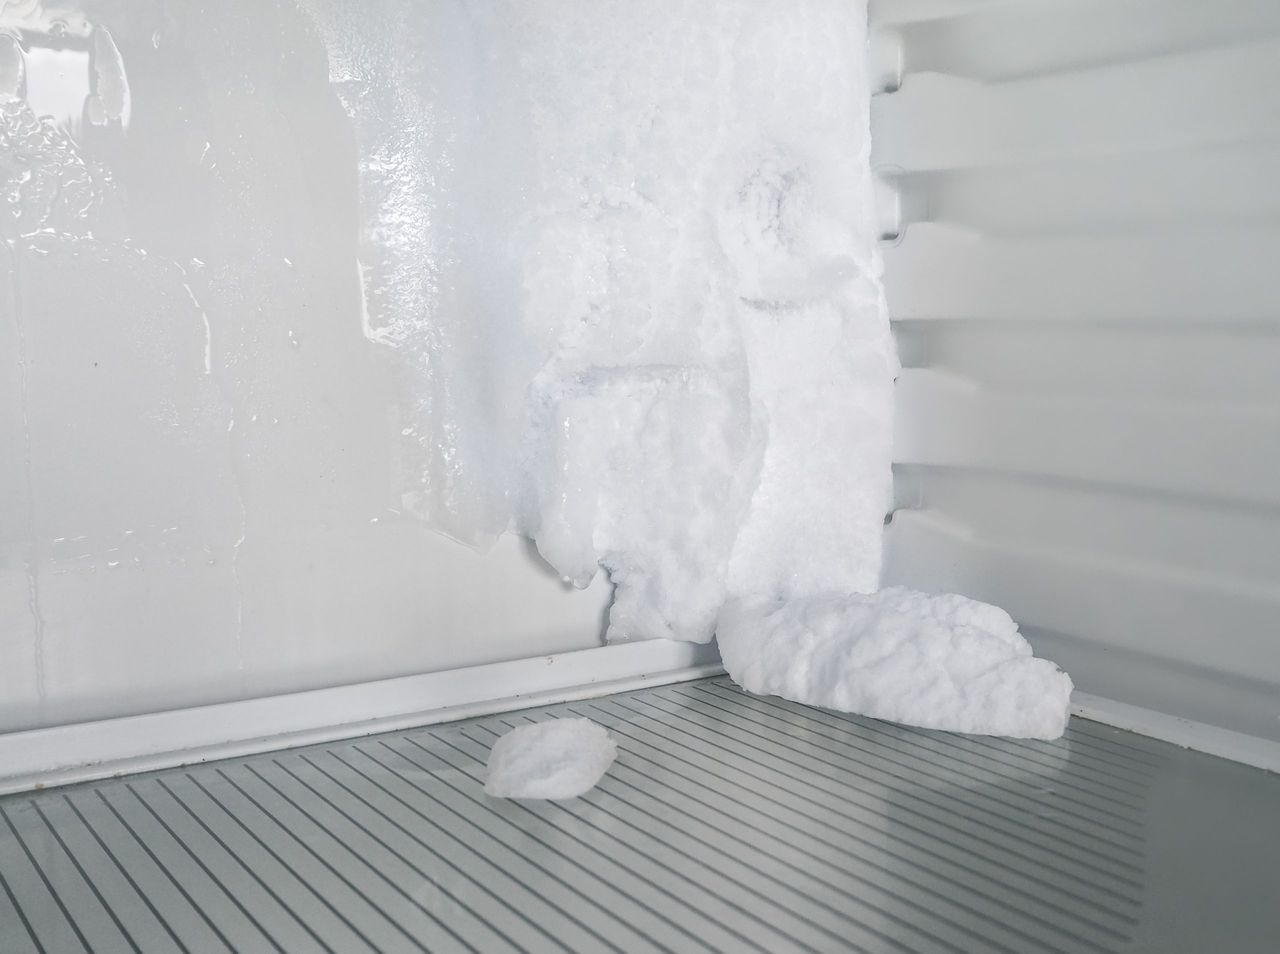 The ice in the refrigerator. Defrosting the refrigerator.